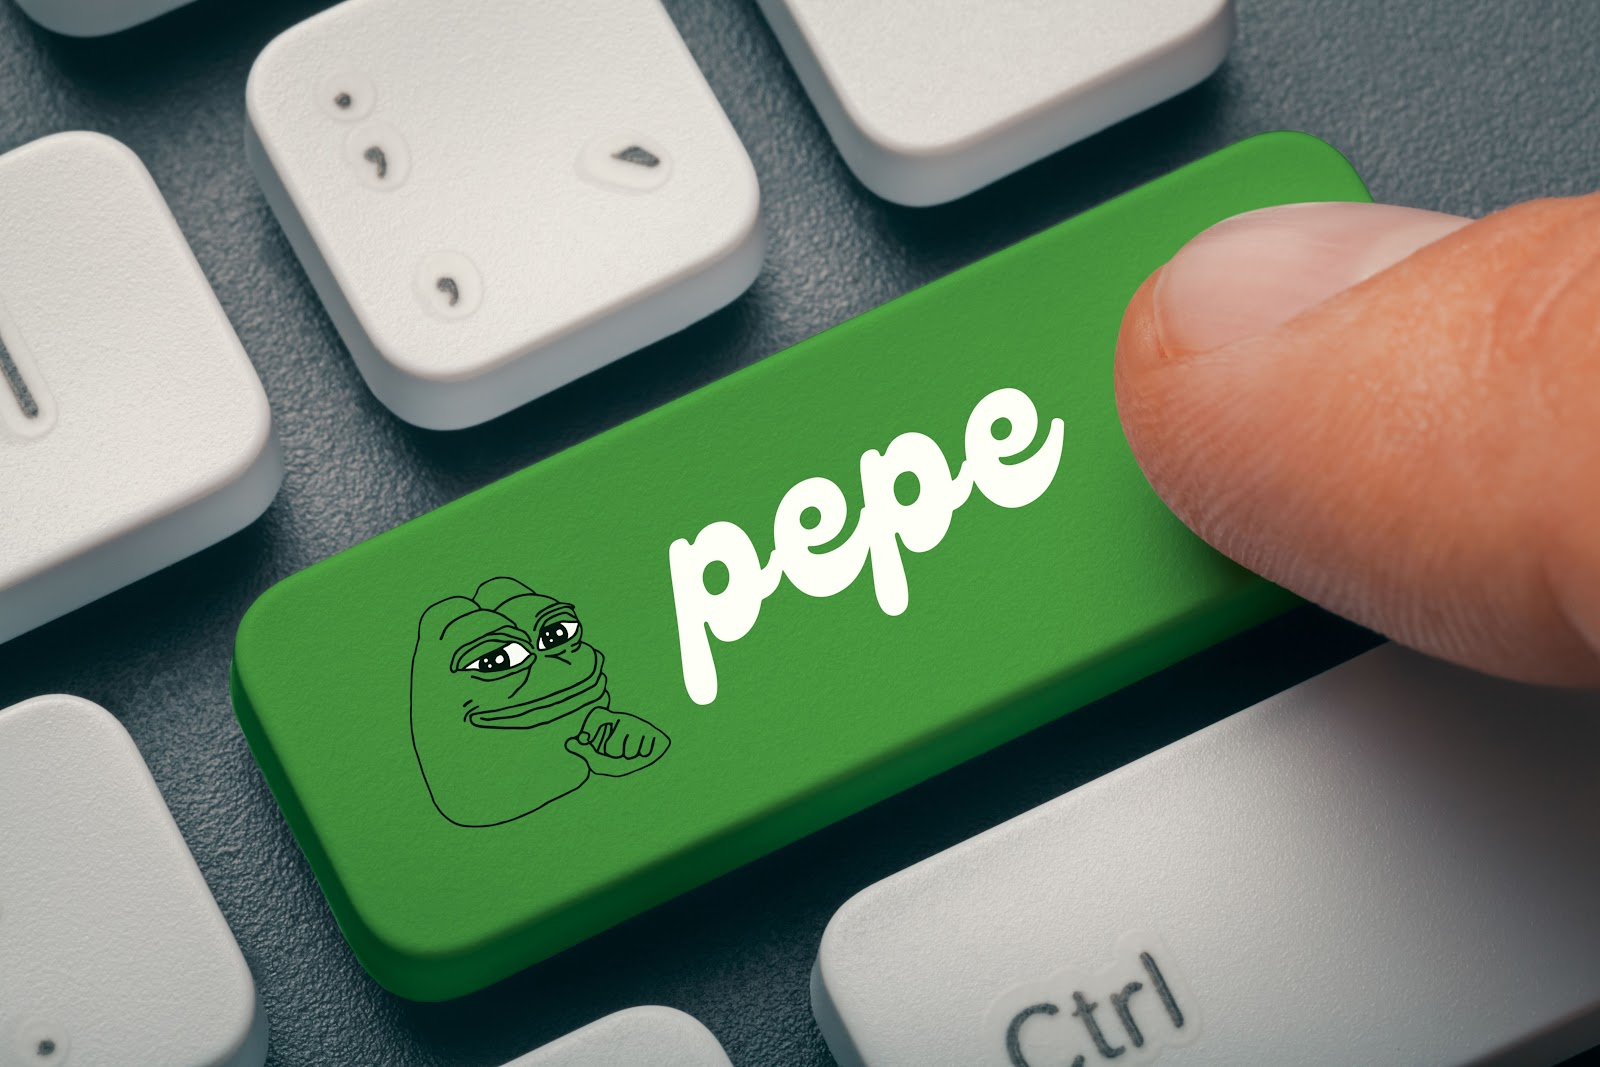 Could This New Crypto be the Next Bonk or Pepe After Raising $2.2m?